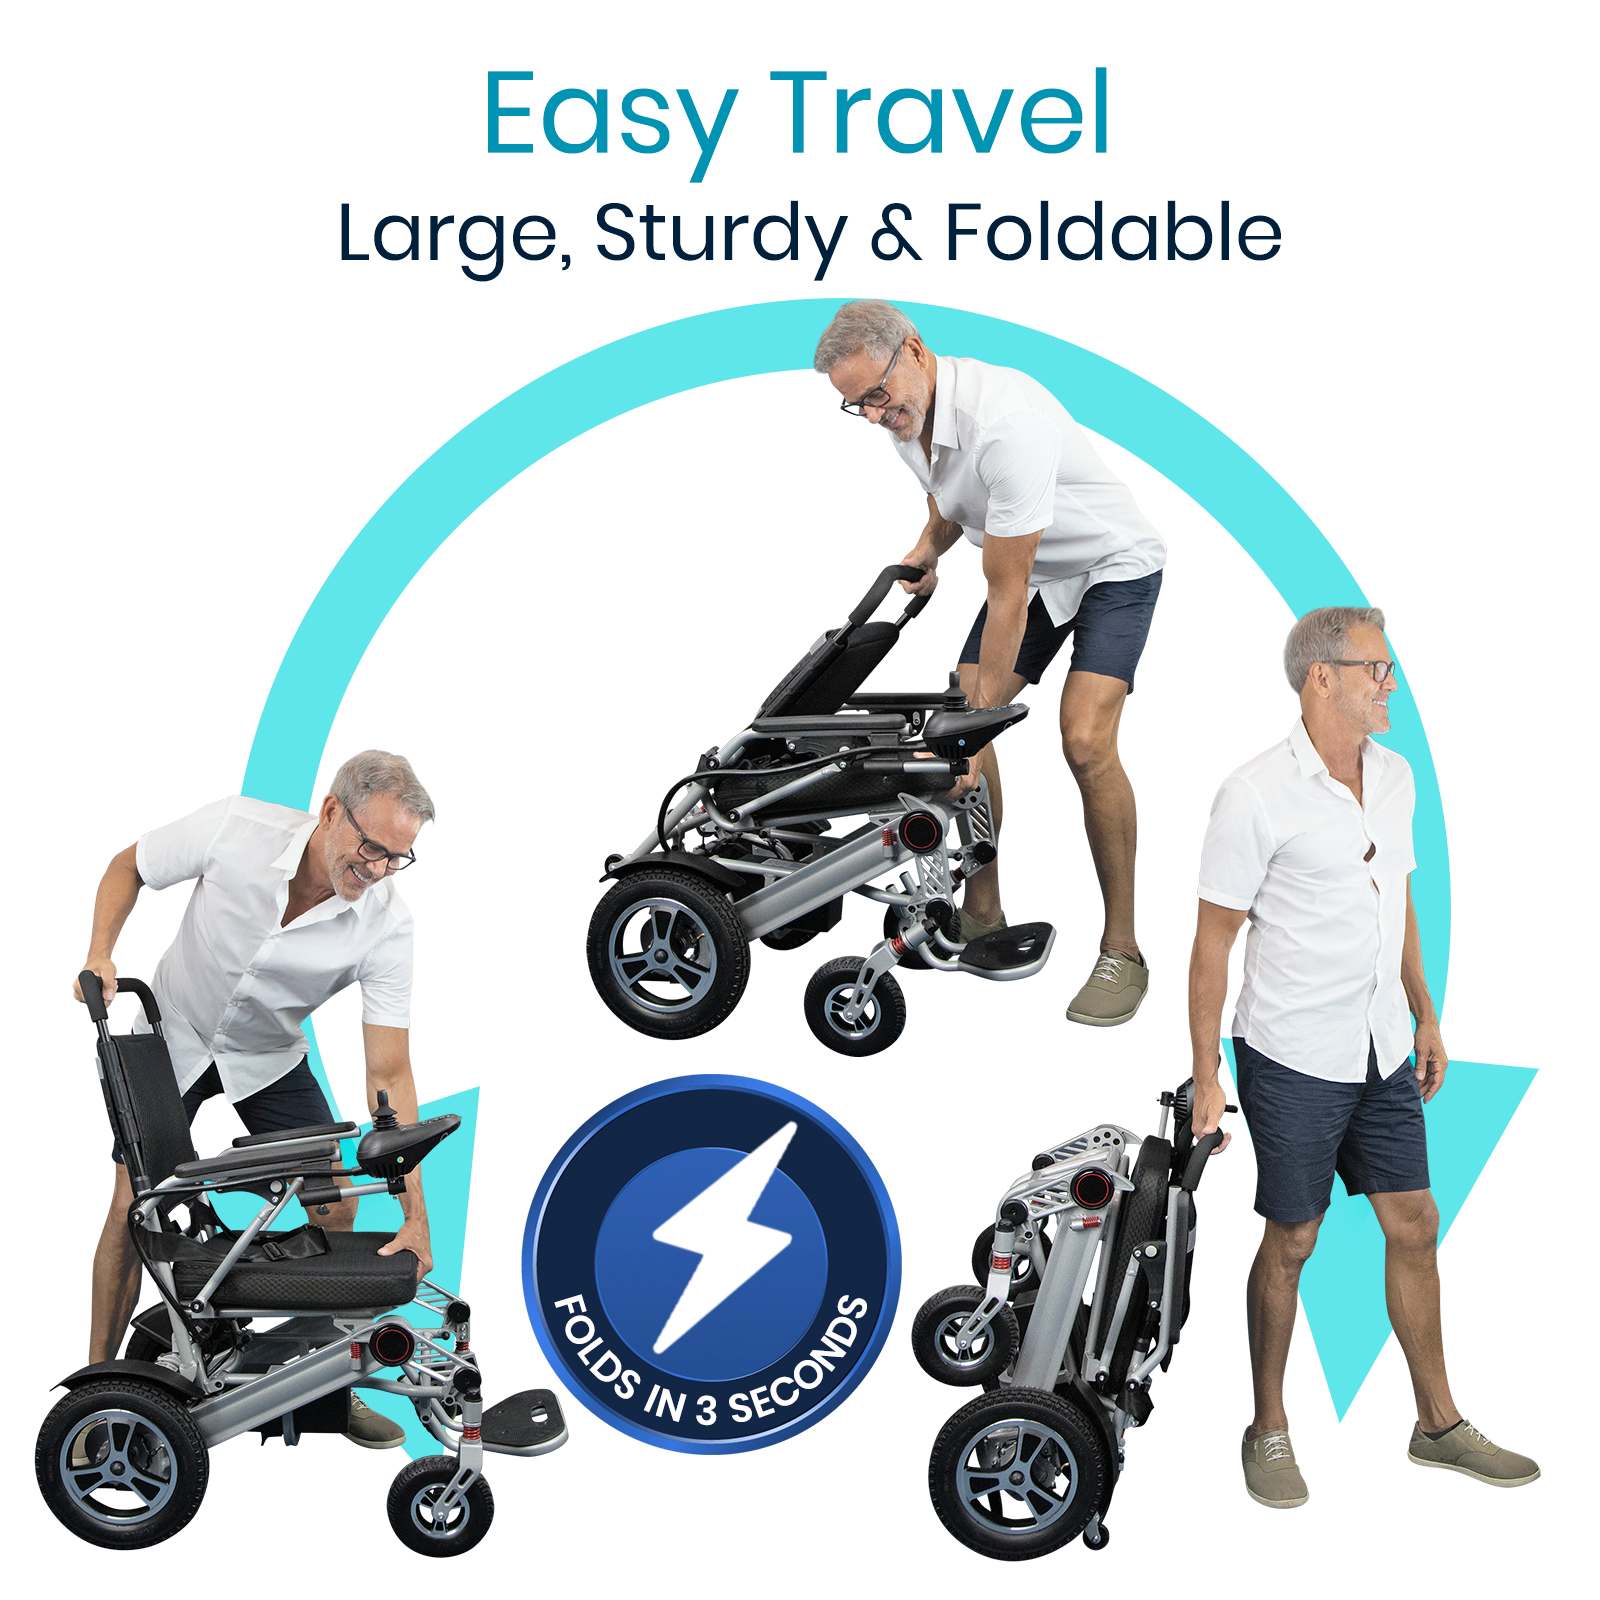 Foldable Power Wheelchair (265lb Weight Capacity)